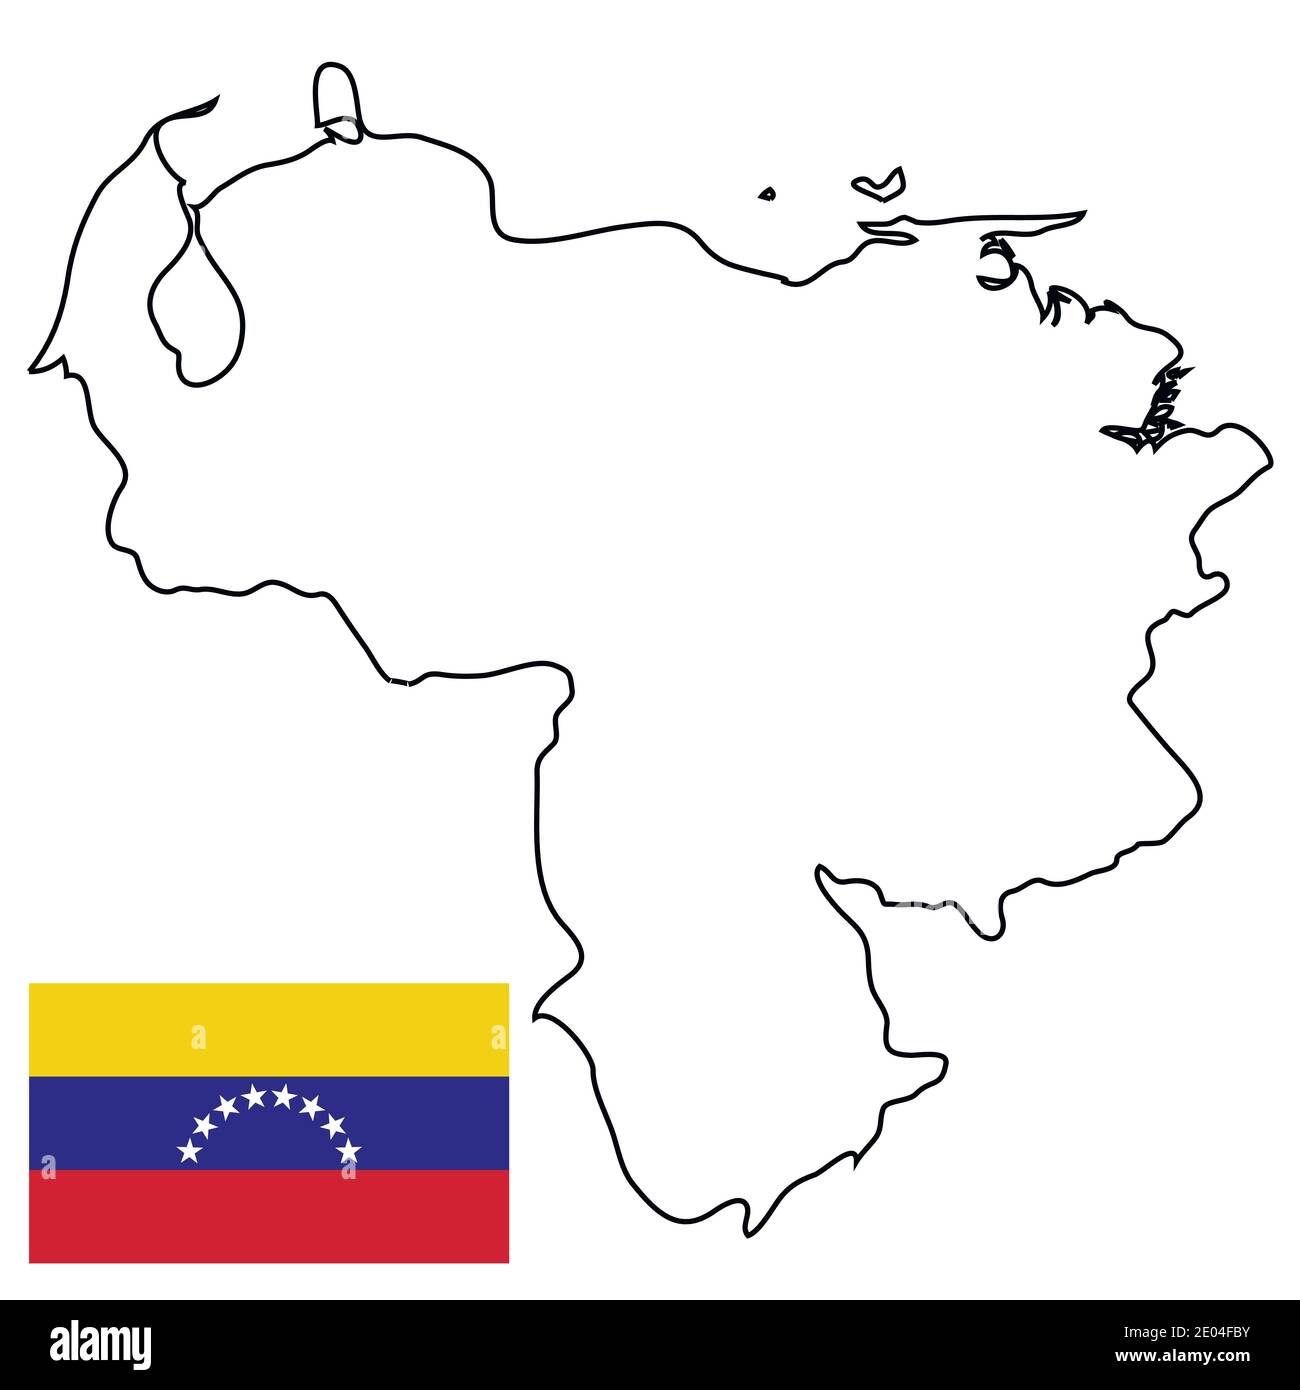 Outline country of the state of Venezuela, vector of the border outline of the state of Venezuela Stock Vector